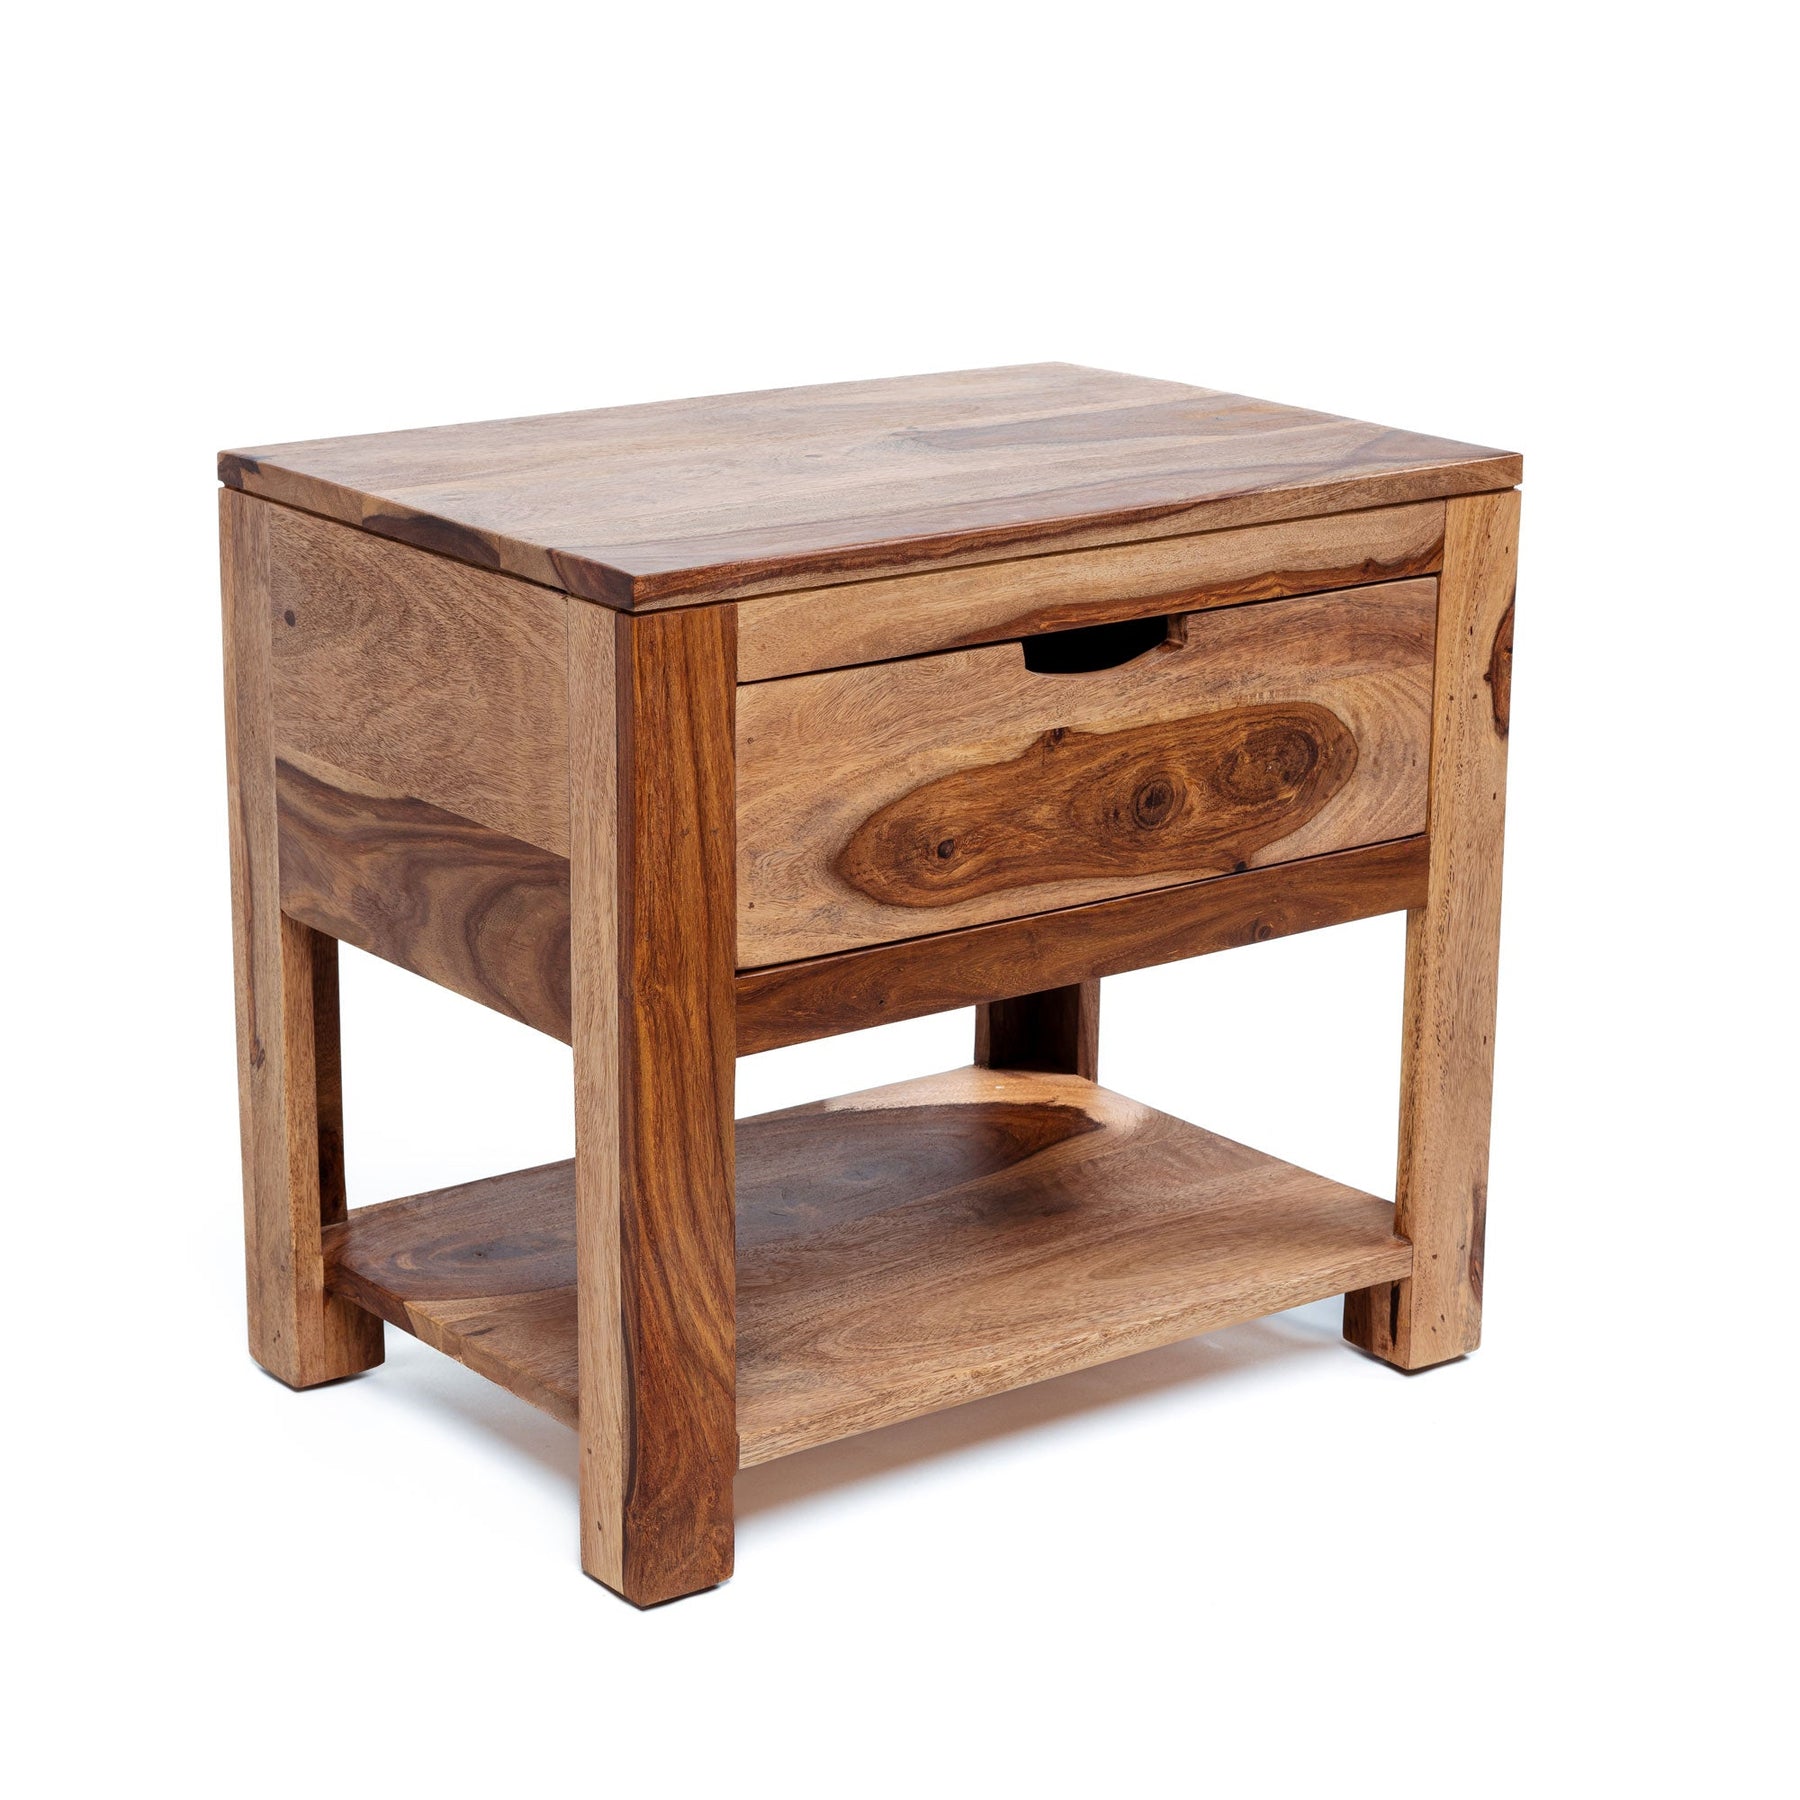 Zen Night Table - Wooden Beside Table with Drawer and Storage Shelf | 50x35x45 cm